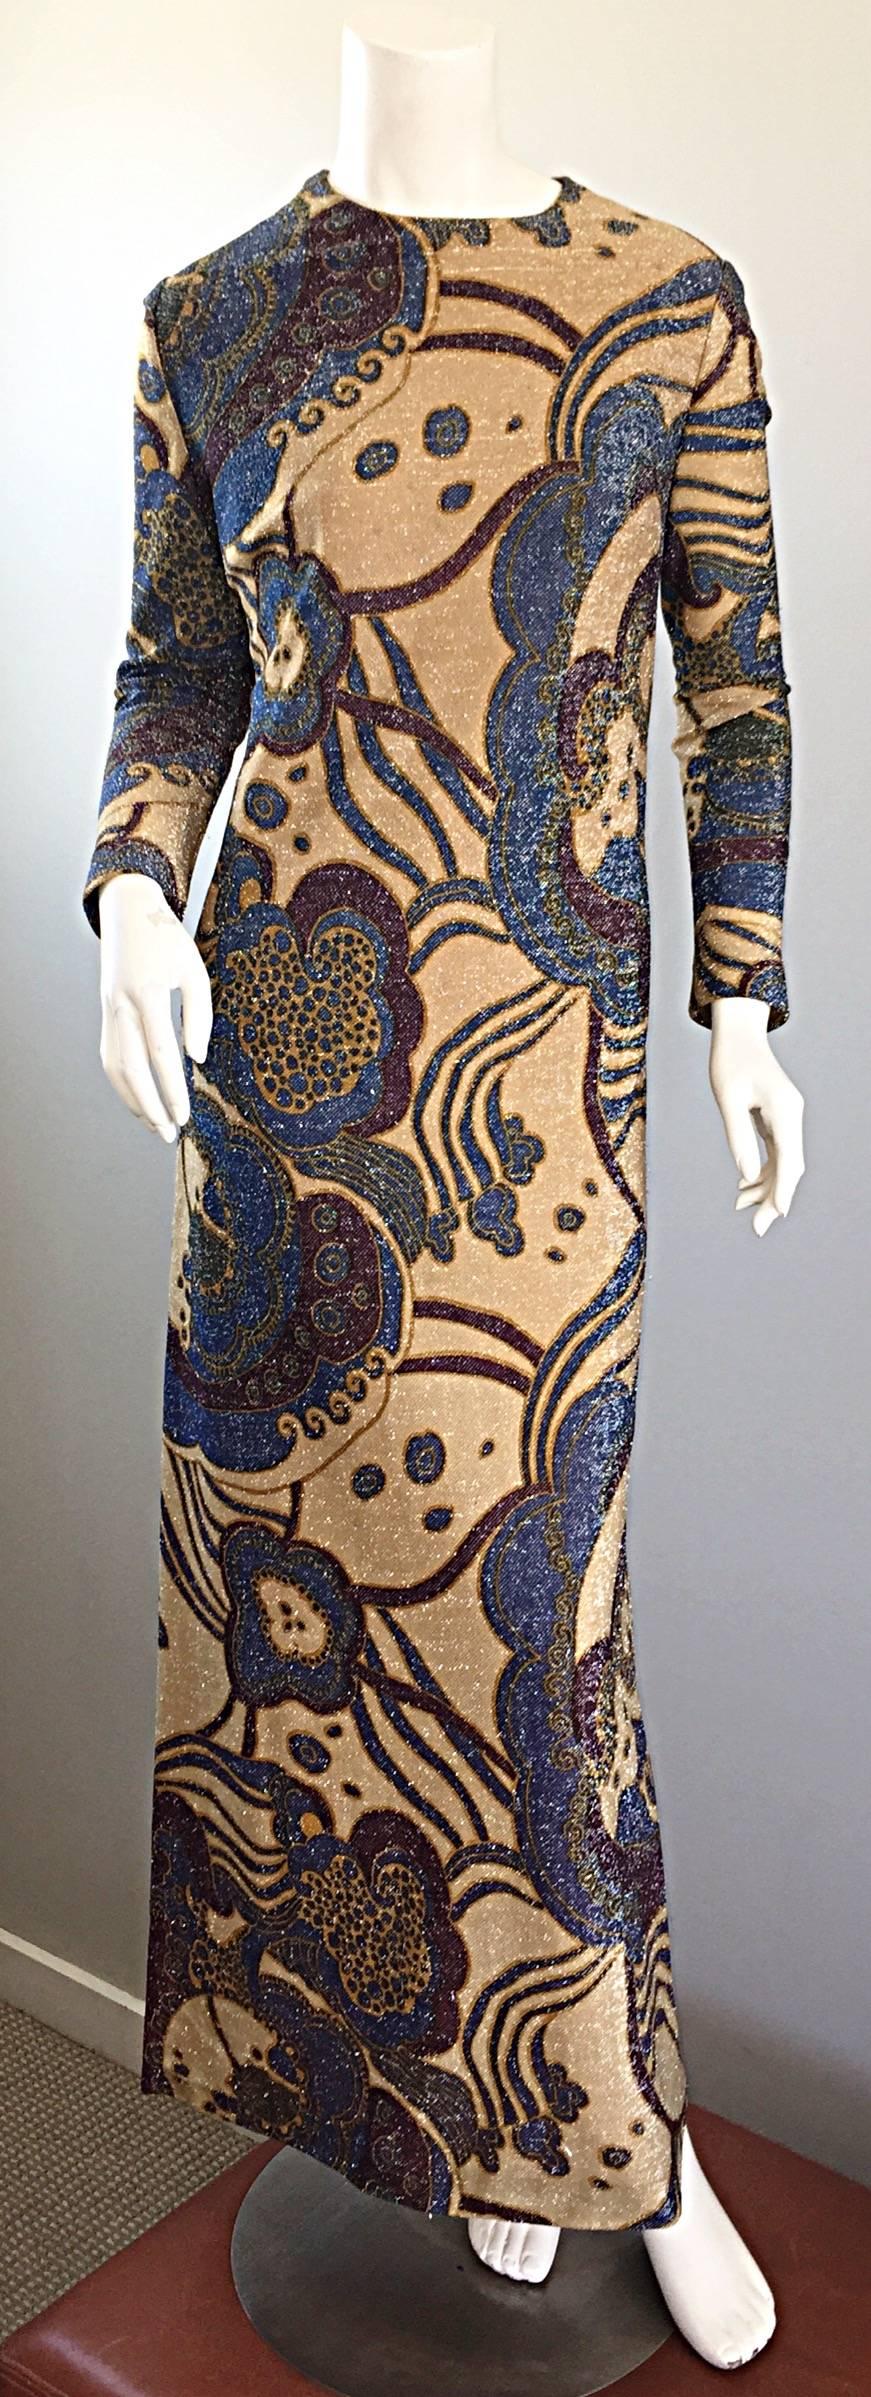 Amazing vintage 1960s JEAN LOUIS SCHERRER Haute Couture gold metallic silk lurex gown! Super rare piece from one of Scherrer's first collections! The French designer started his career working as an apprentice for Christian Dior and Yves Saint